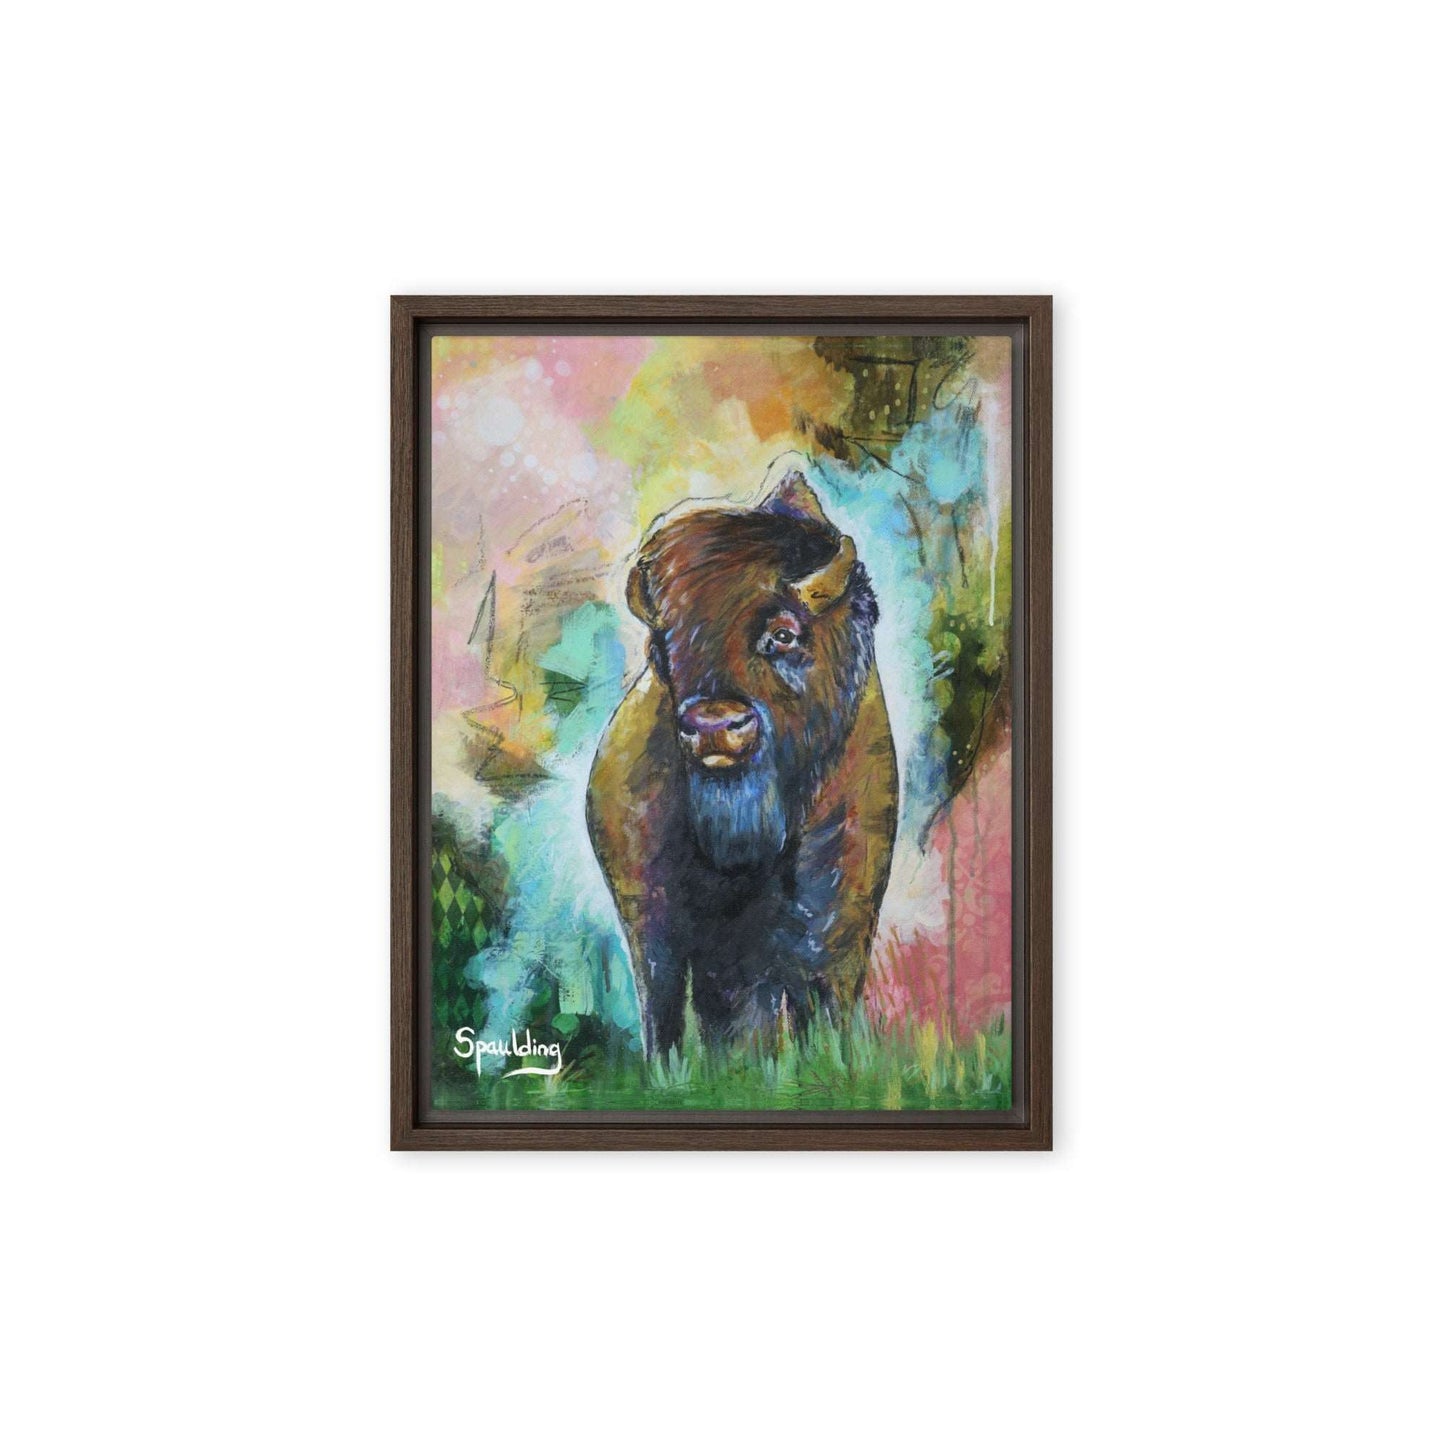 Framed canvas print with a bison standing in grass with a pink, yellow, green, teal color scheme background.